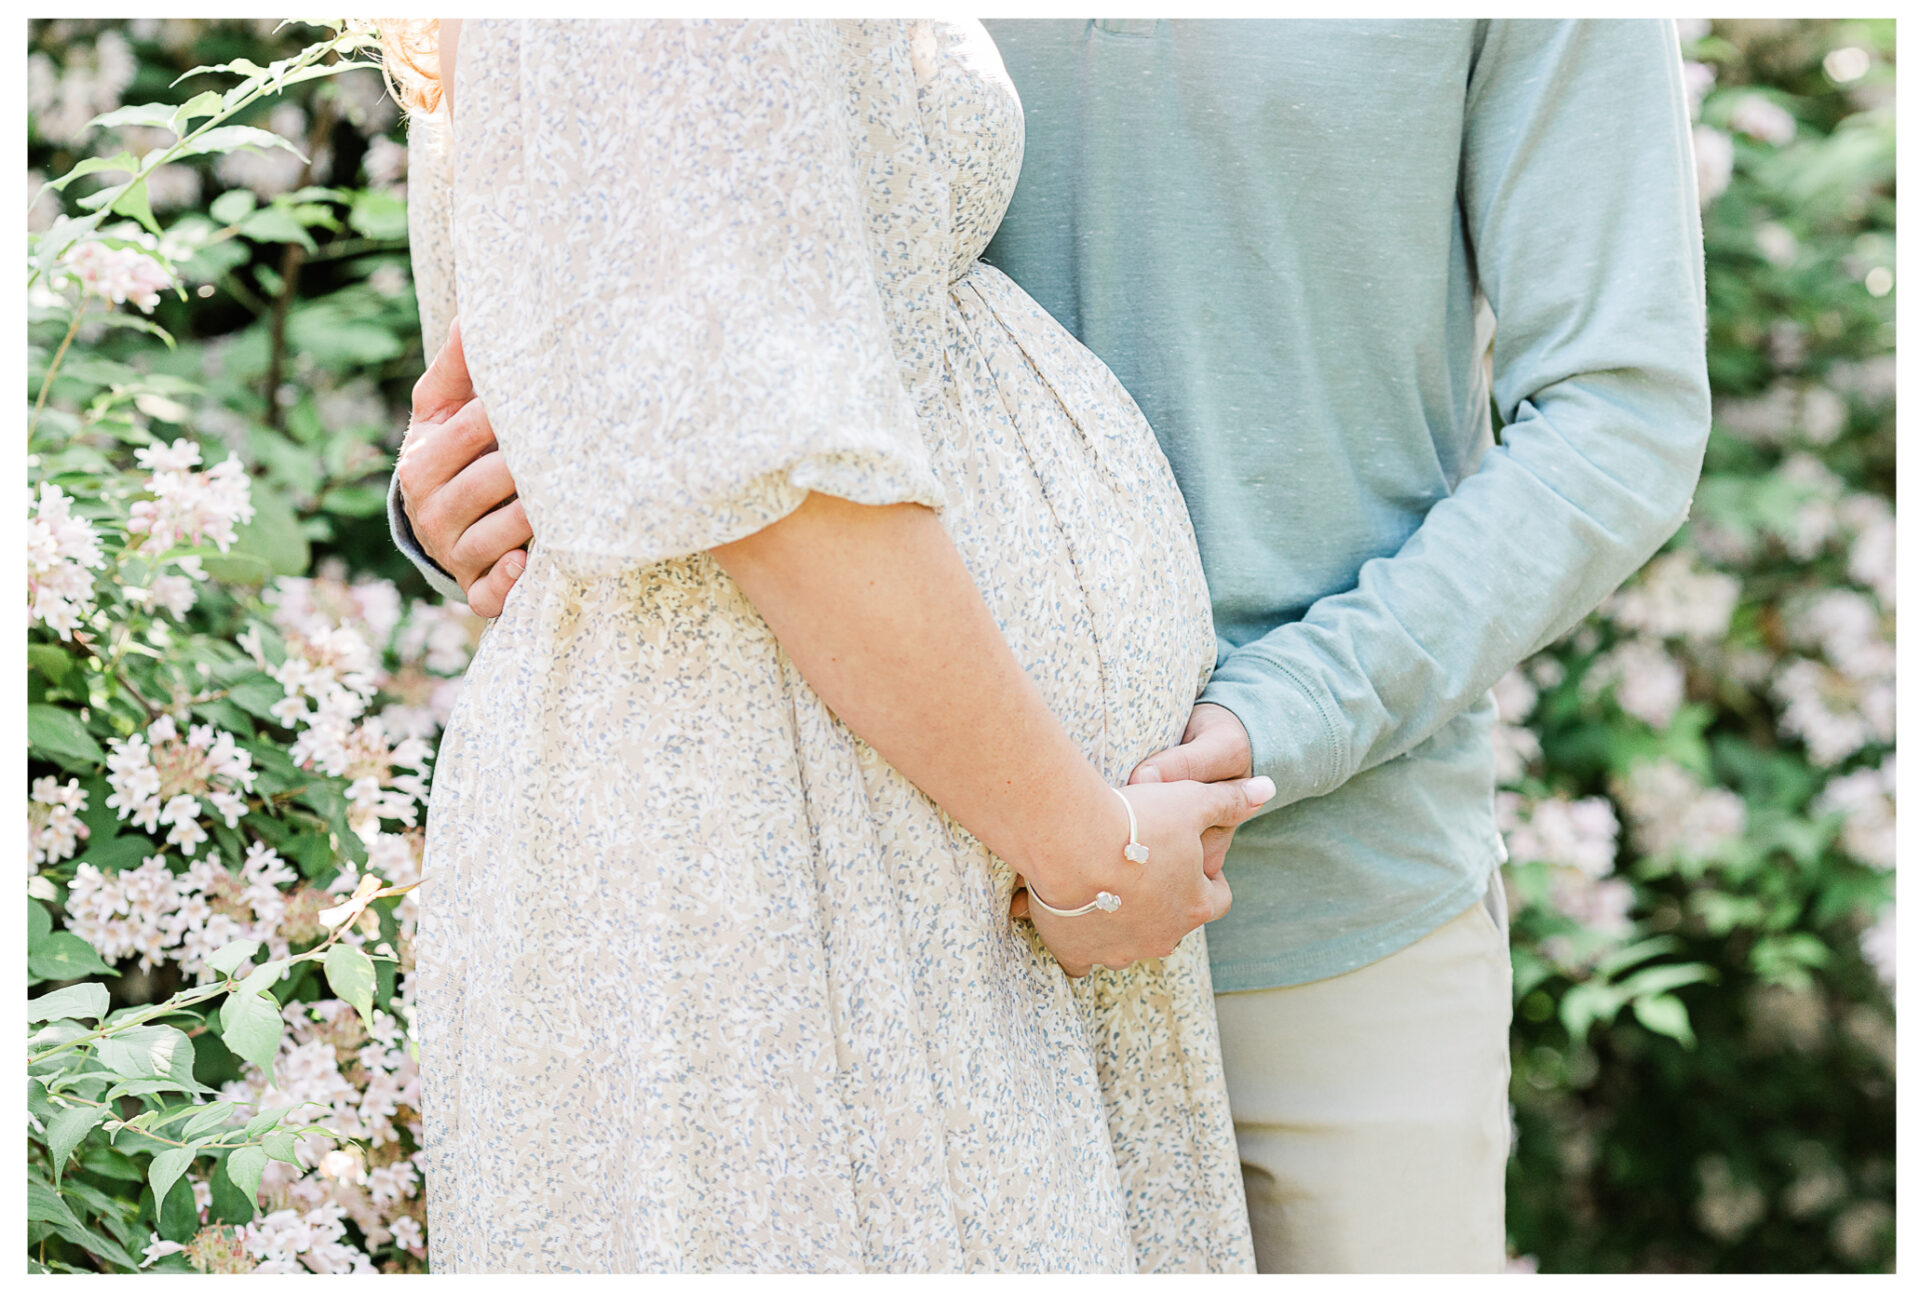 Winter Freire Photography | maternity session outdoors | a close cropped image of the couple's hands on the baby bump